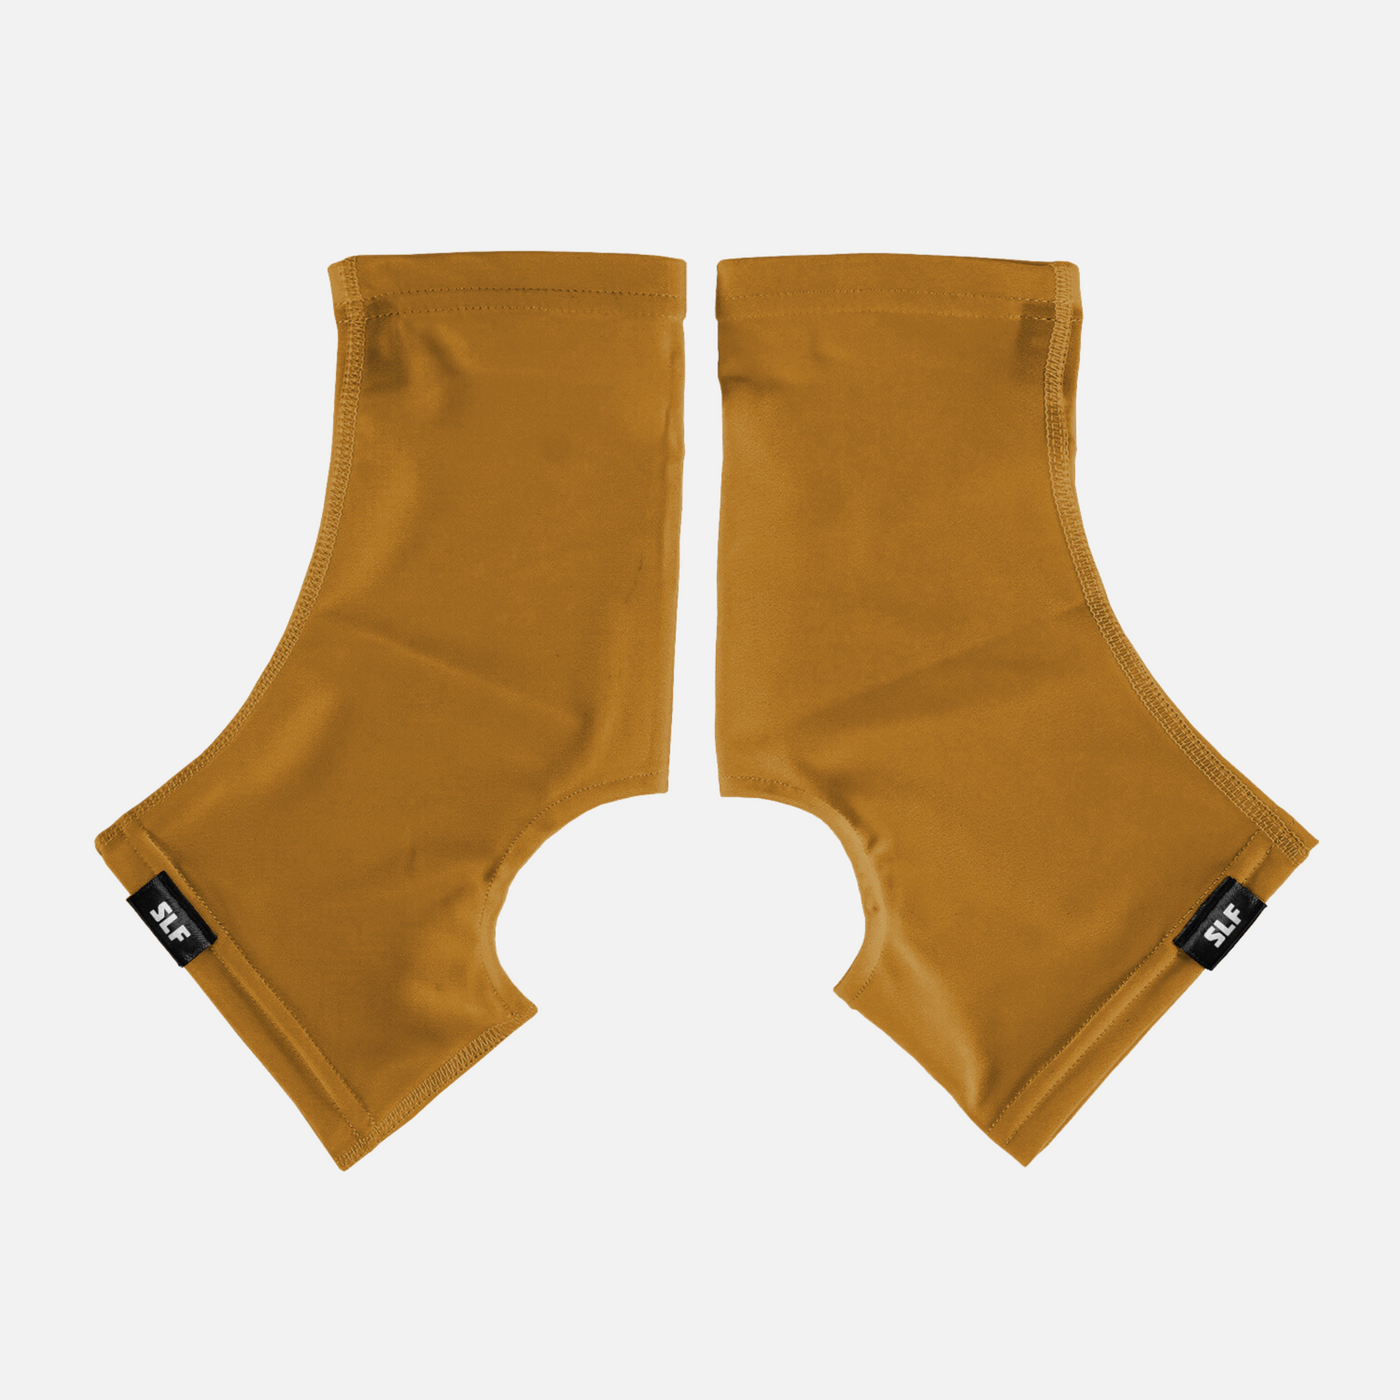 Hue Gold Kids Spats / Cleat Covers